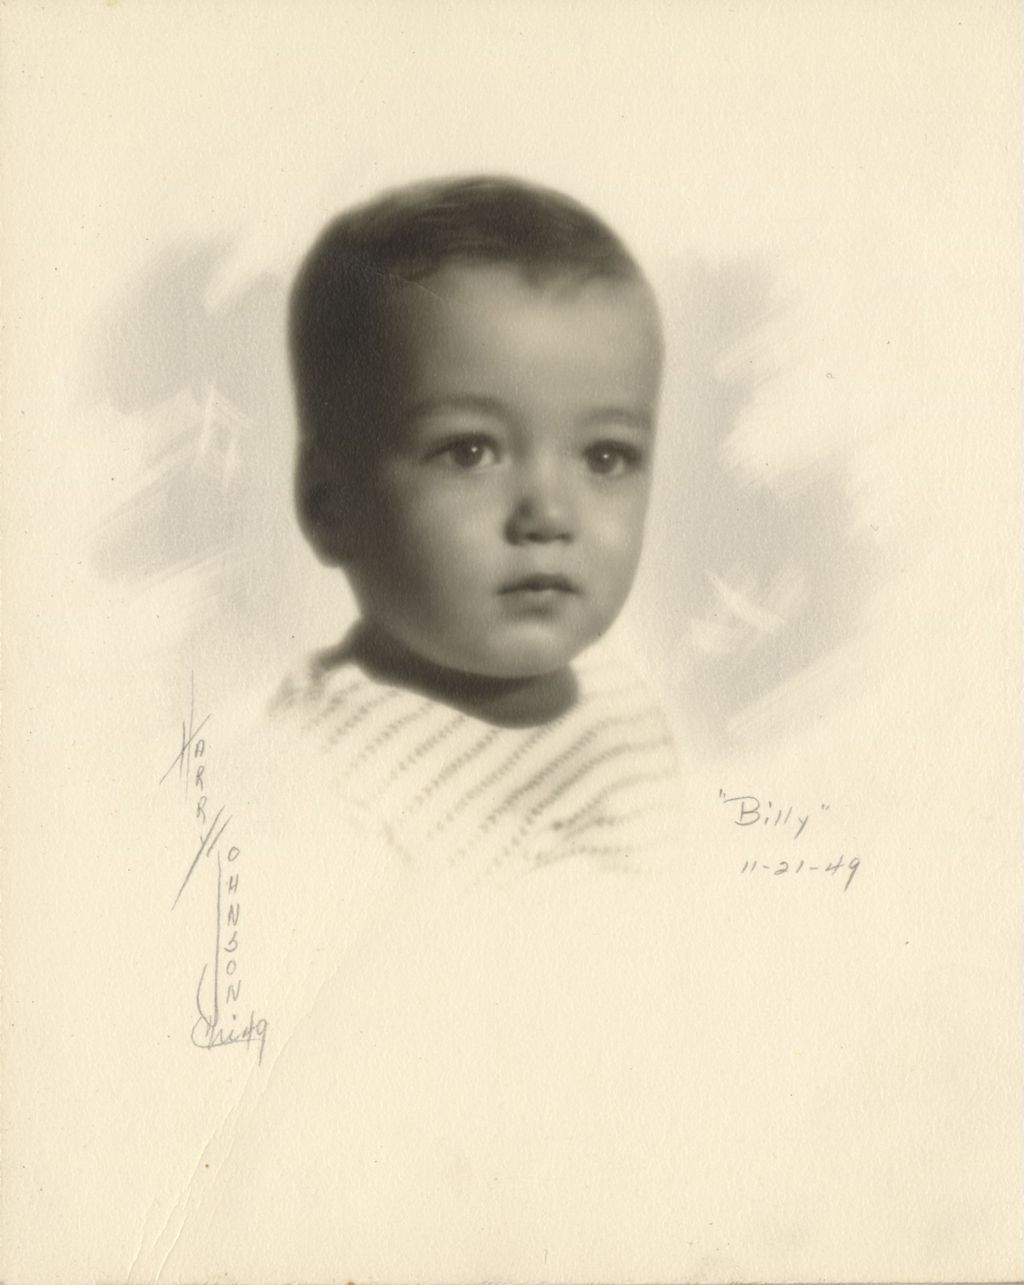 Miniature of Billy [Daley]